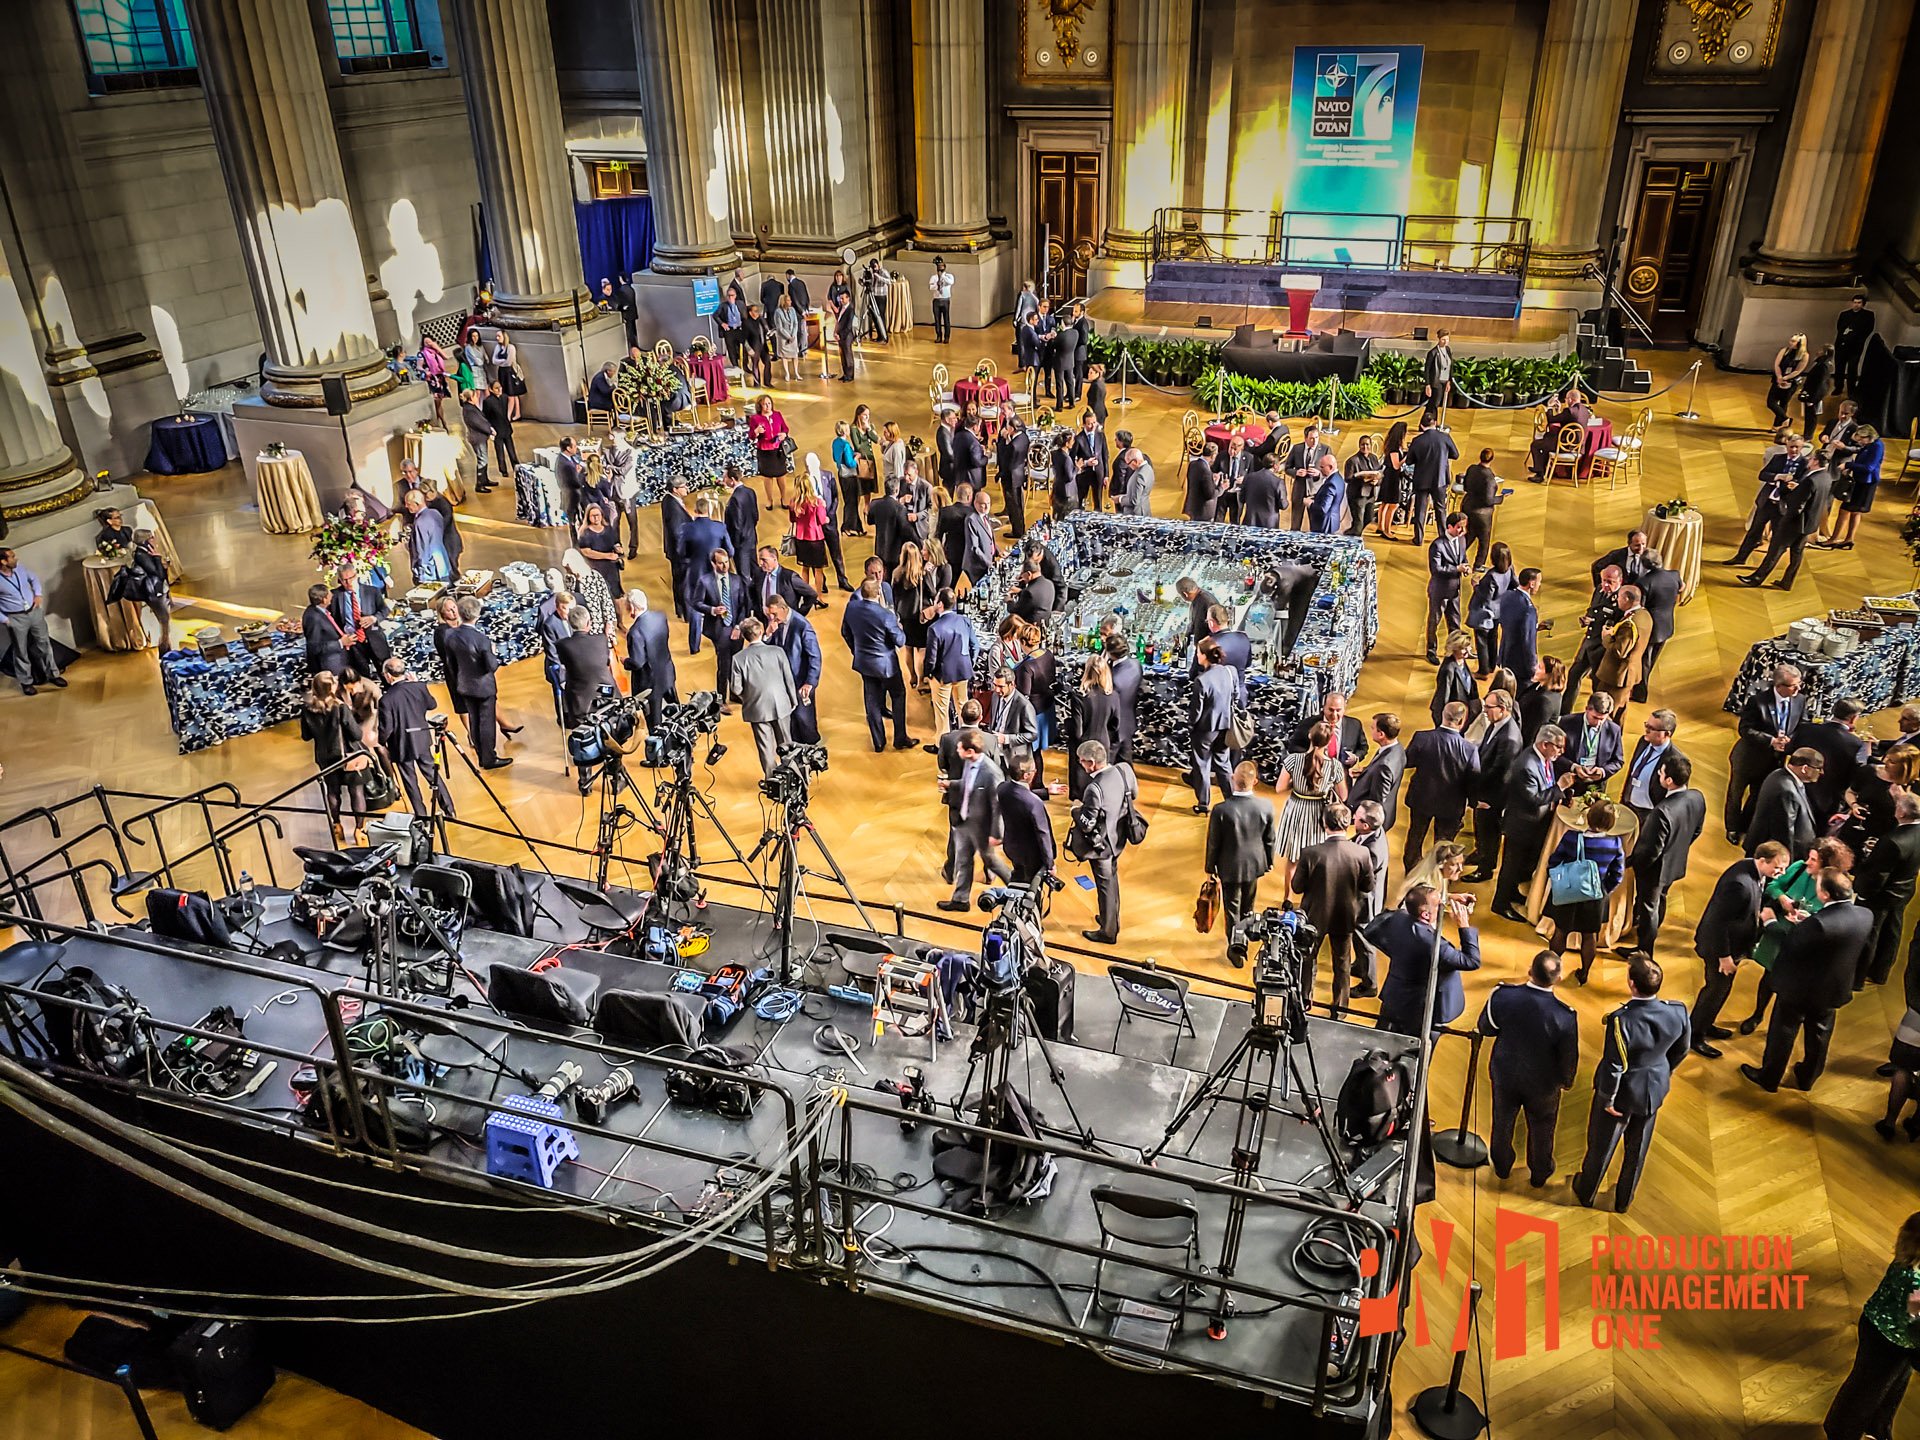 Full Event Production For NATO / US State Department at the Historic Andrew W. Mellon Auditorium in Washington DC